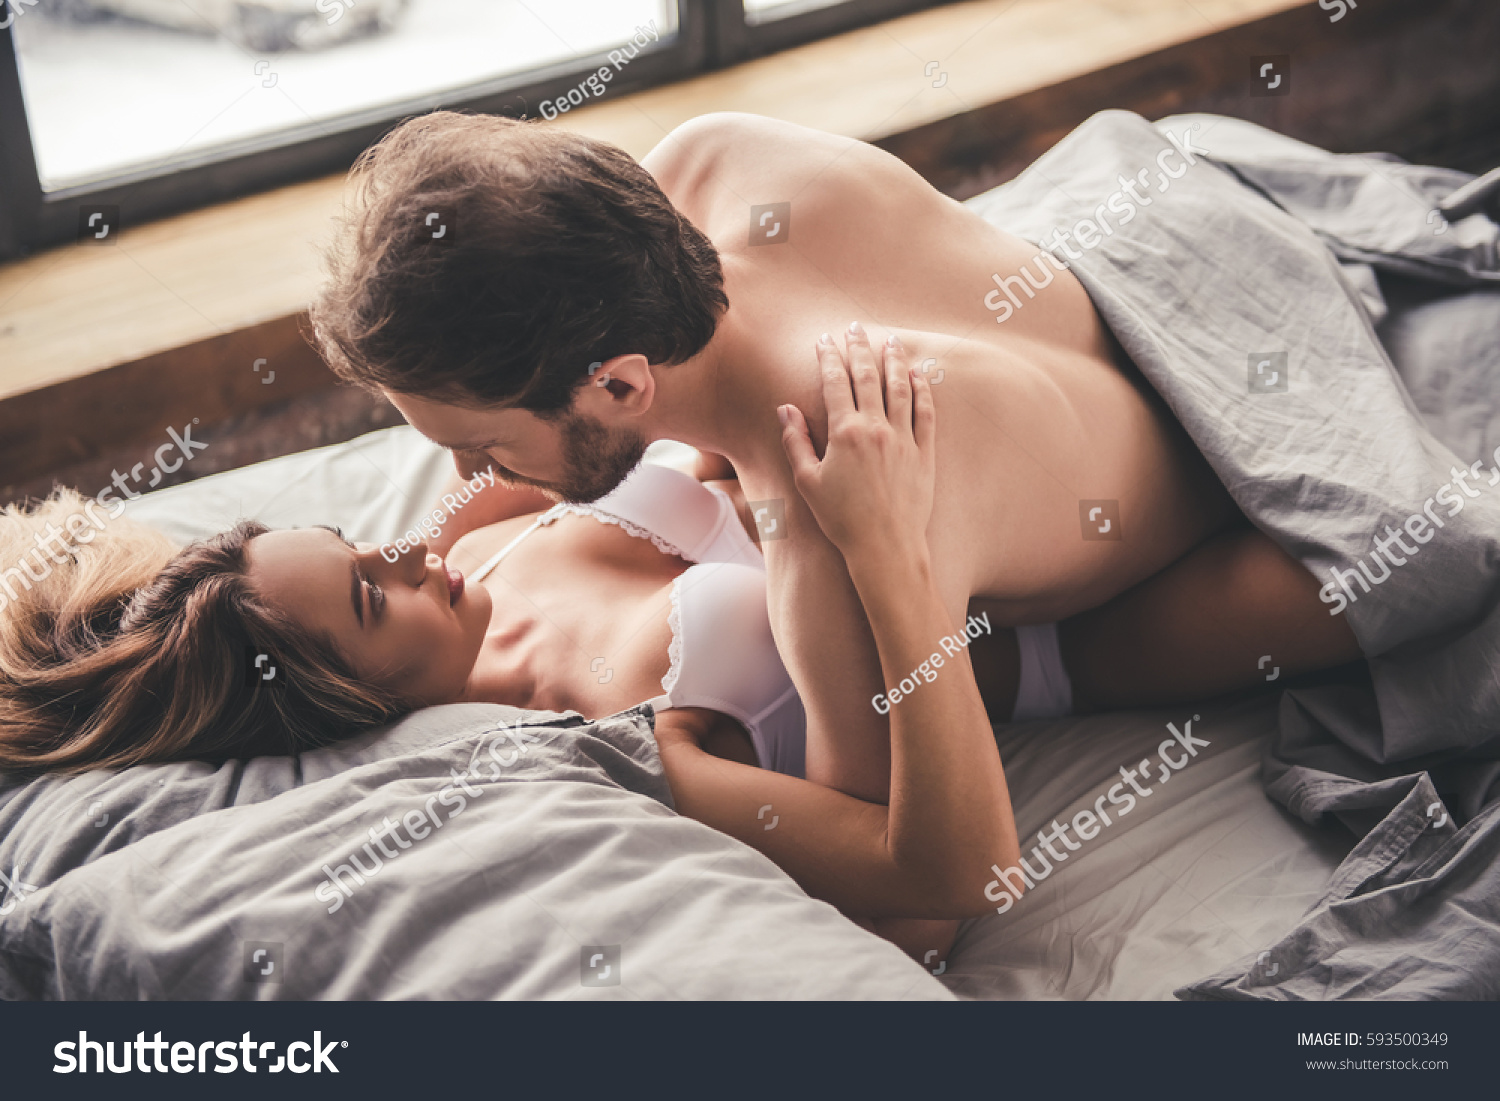 Beautiful Couple Having Sex Bed Home Stock Photo Edit Now 593500349